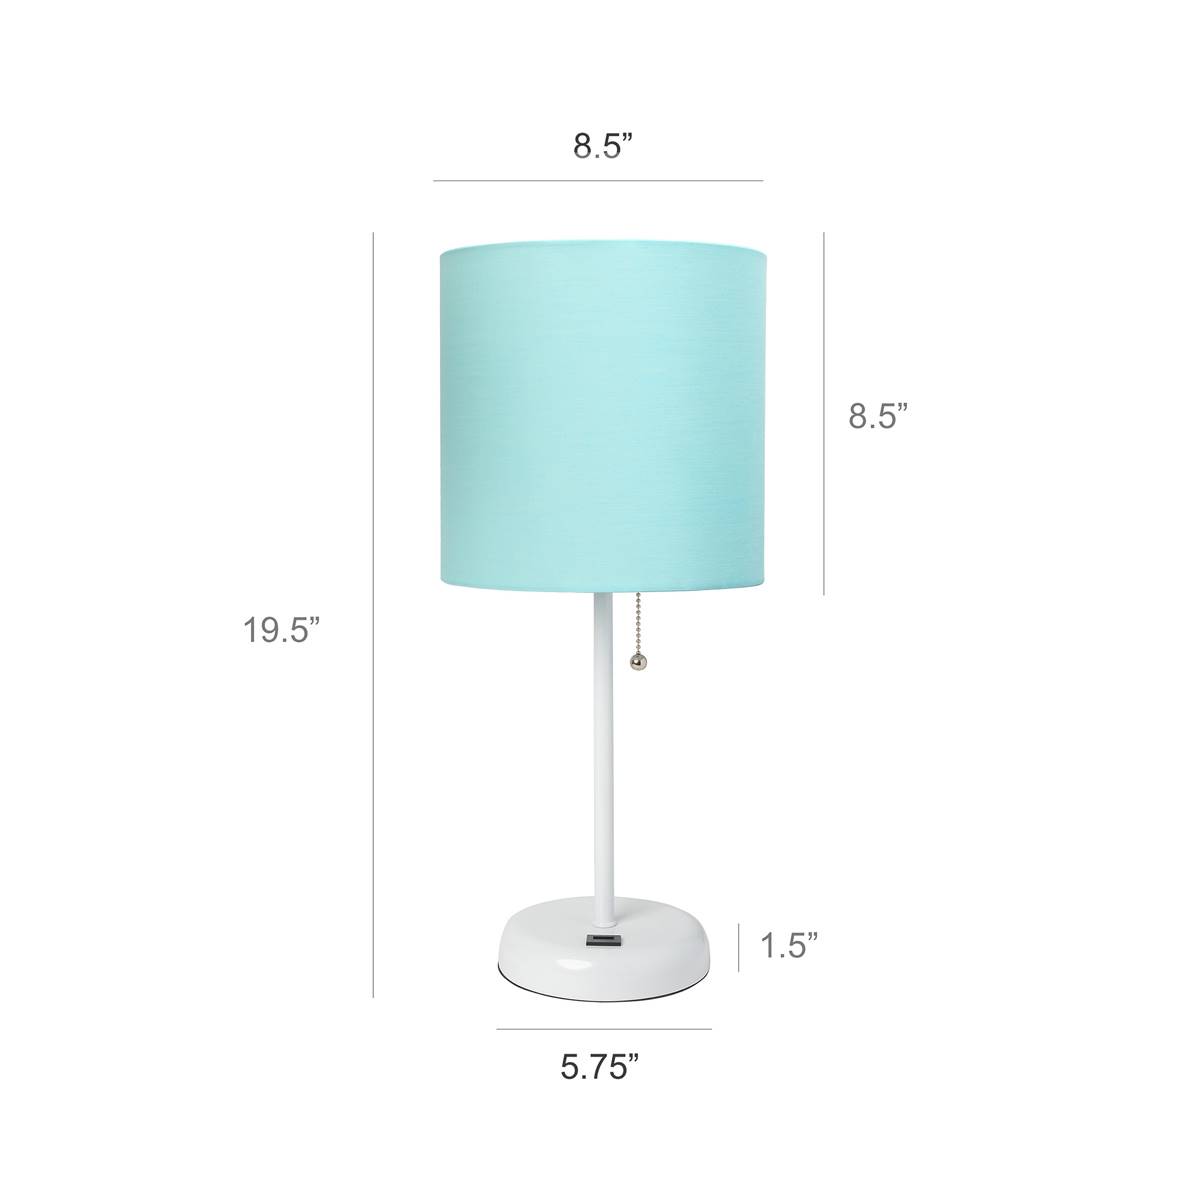 LimeLights Colored Stick Lamp W/USB Charging Port & Shade